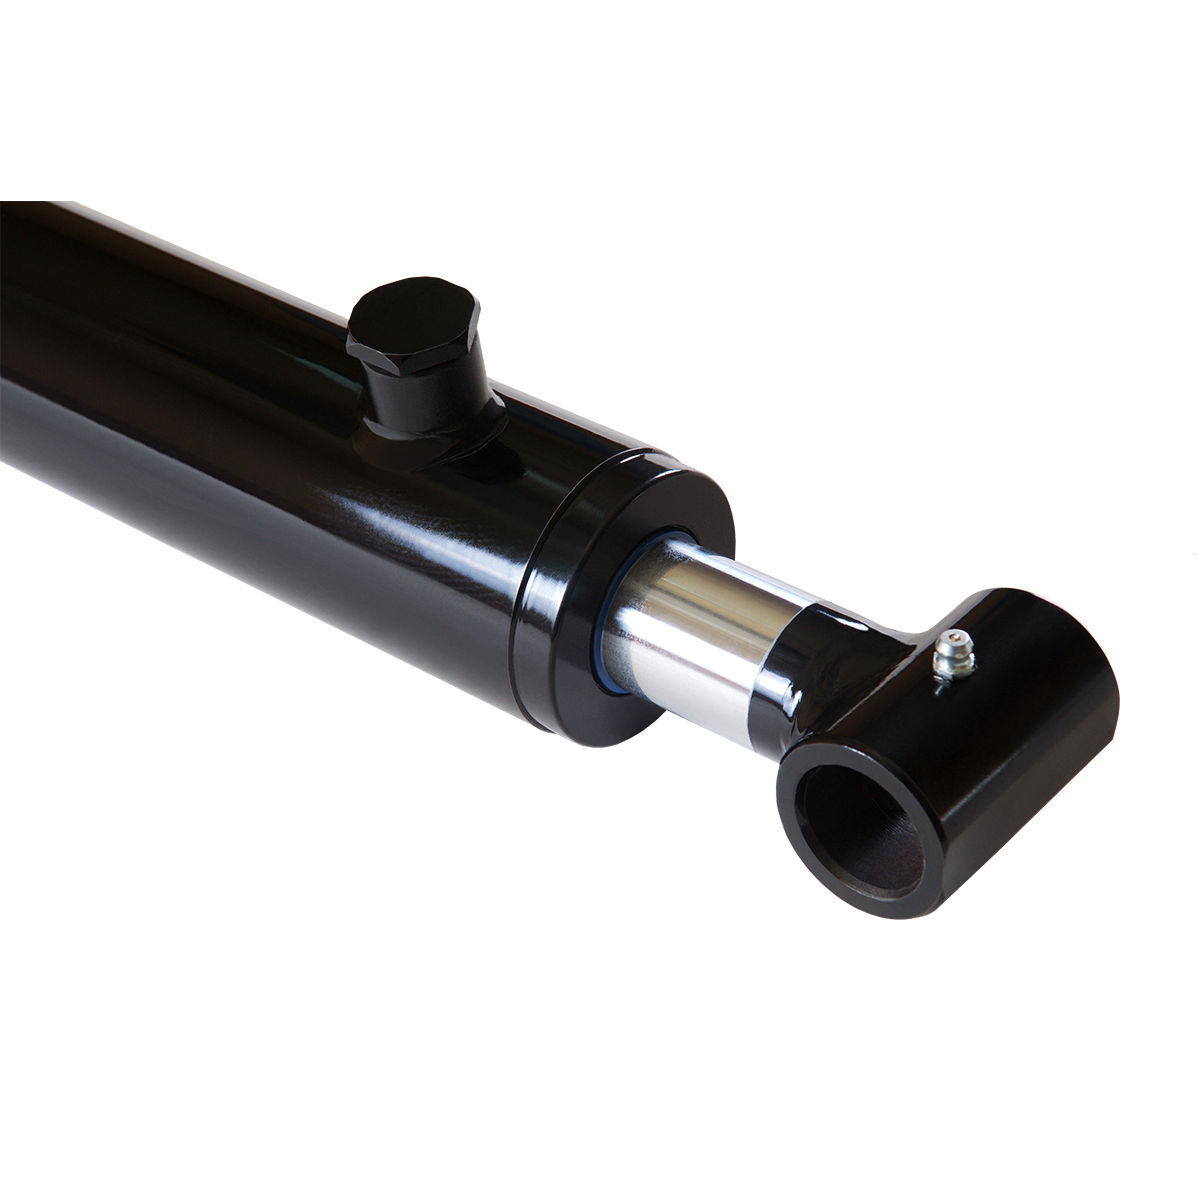 2 bore x 20 stroke hydraulic cylinder, welded cross tube double acting cylinder | Magister Hydraulics